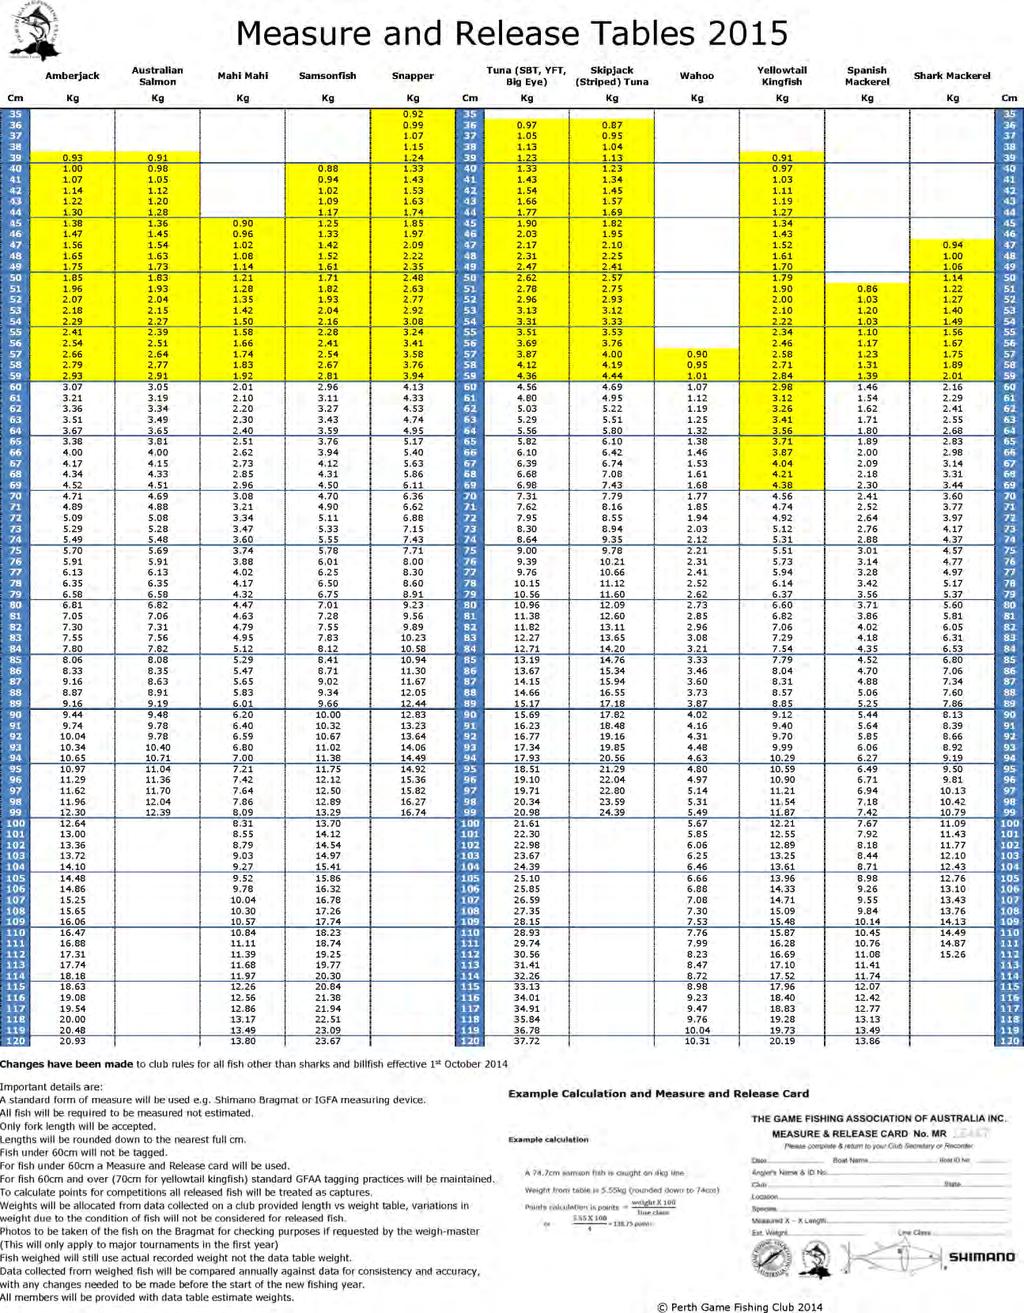 Brag and Release Update The measure and release tables for 2015 have been completed and are available as a double sided laminated sheet, handy to have on the boat.